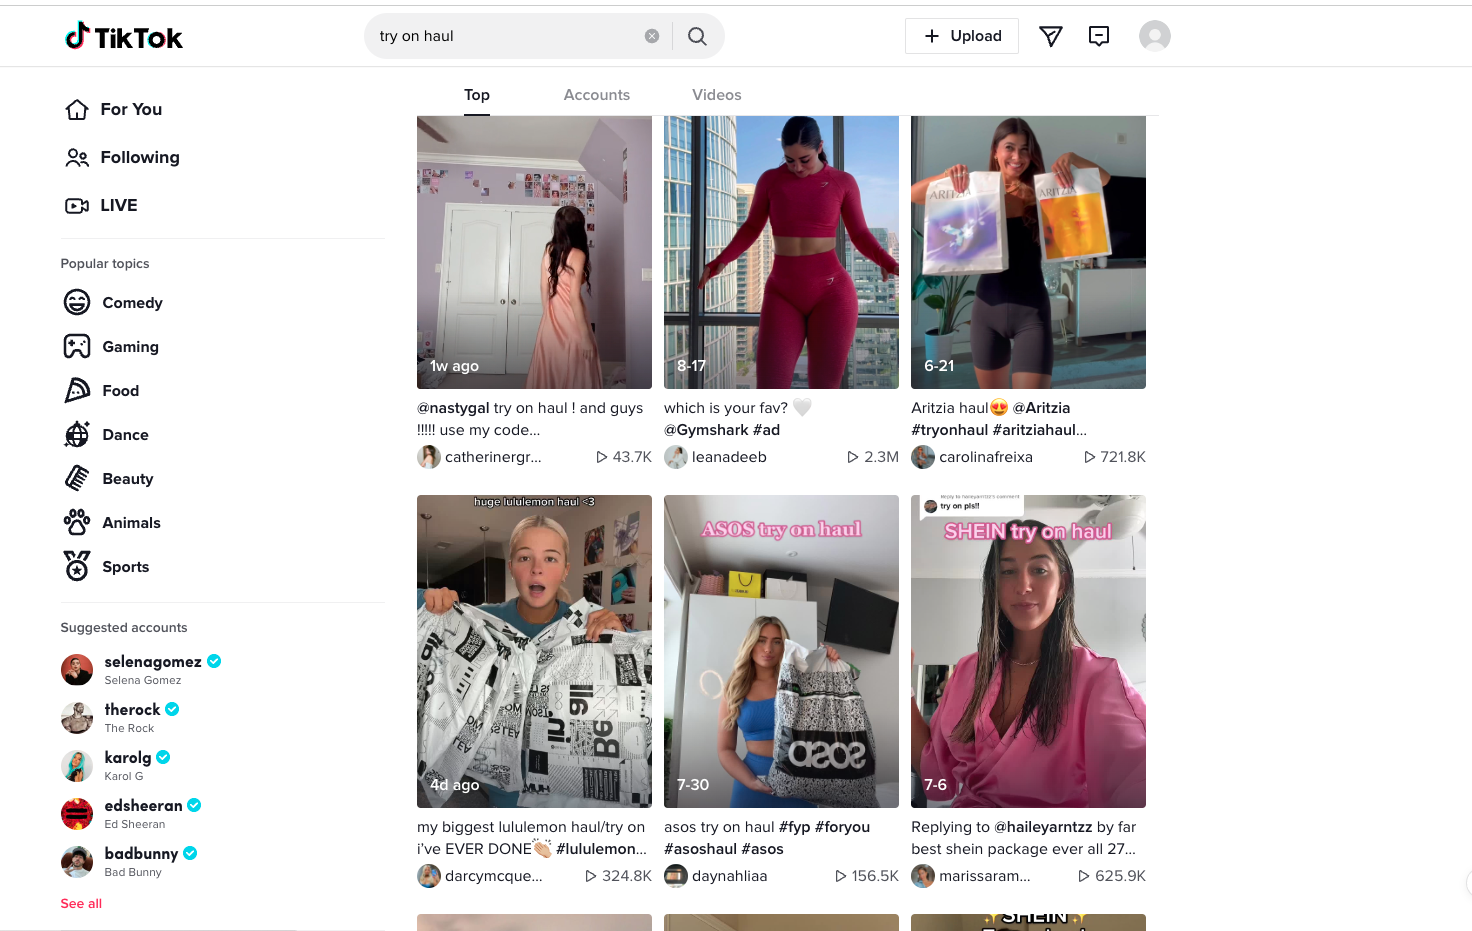 SHEIN, H&M, Aritzia, ASOS, Amazon, and others are common companies highlighted in try-on haul videos.  (Screenshot: Gizmodo)